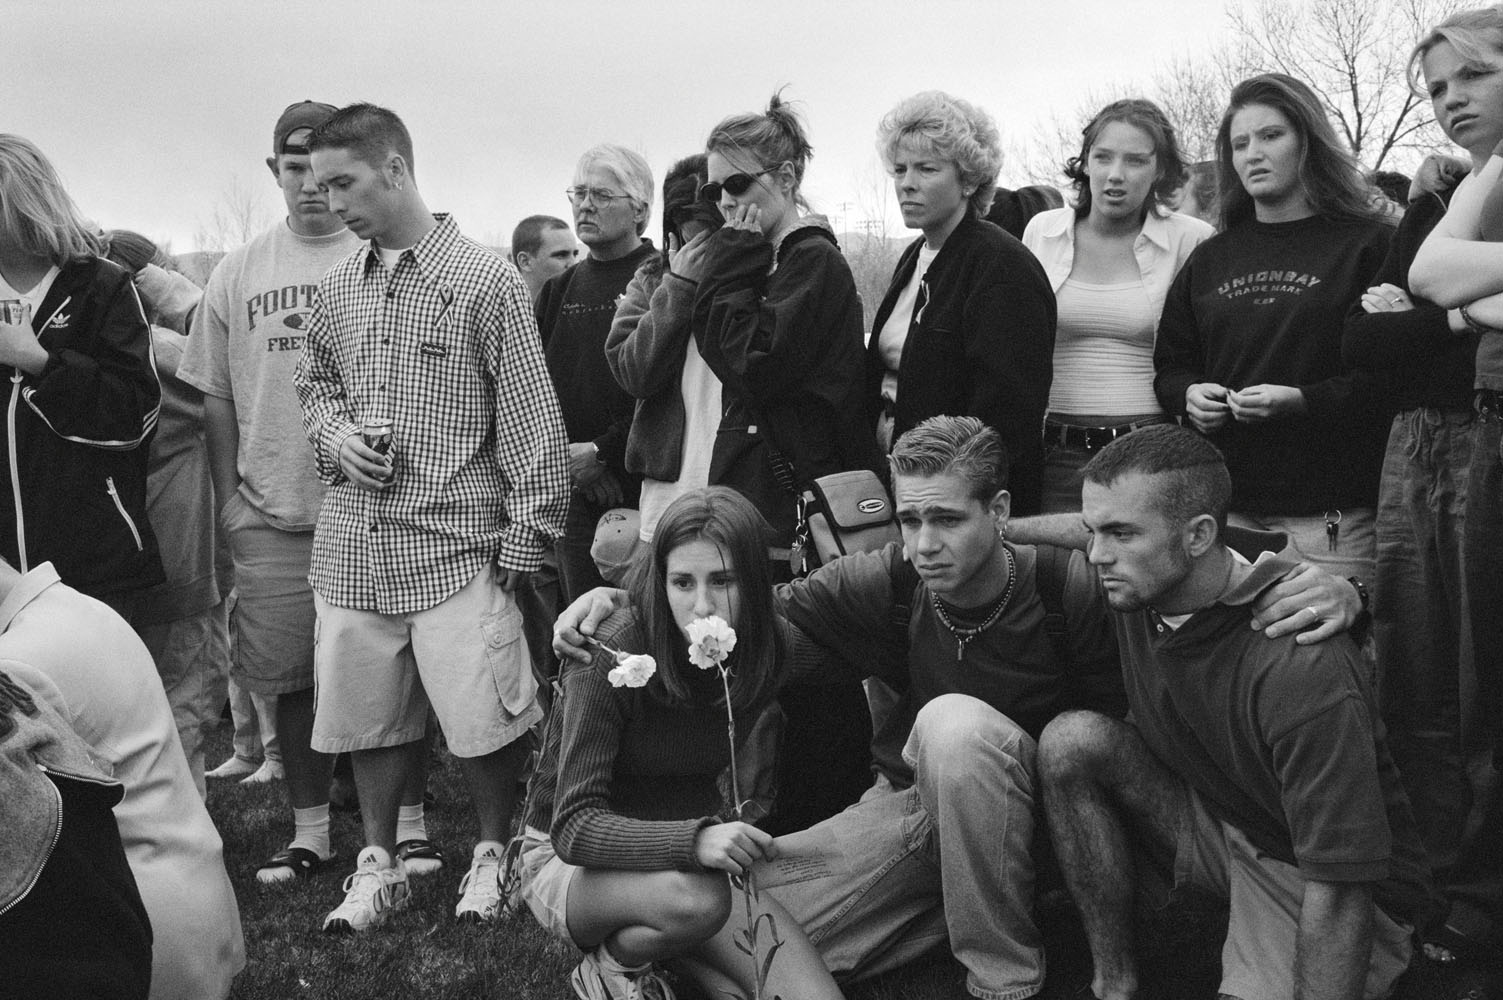 The day after the massacre, Columbine High School students gather outside their school to pray and place flowers on the ground. Many just wander among the tributes crying, trying to make sense of what has happened. (Zed Nelson—INSTITUTE)